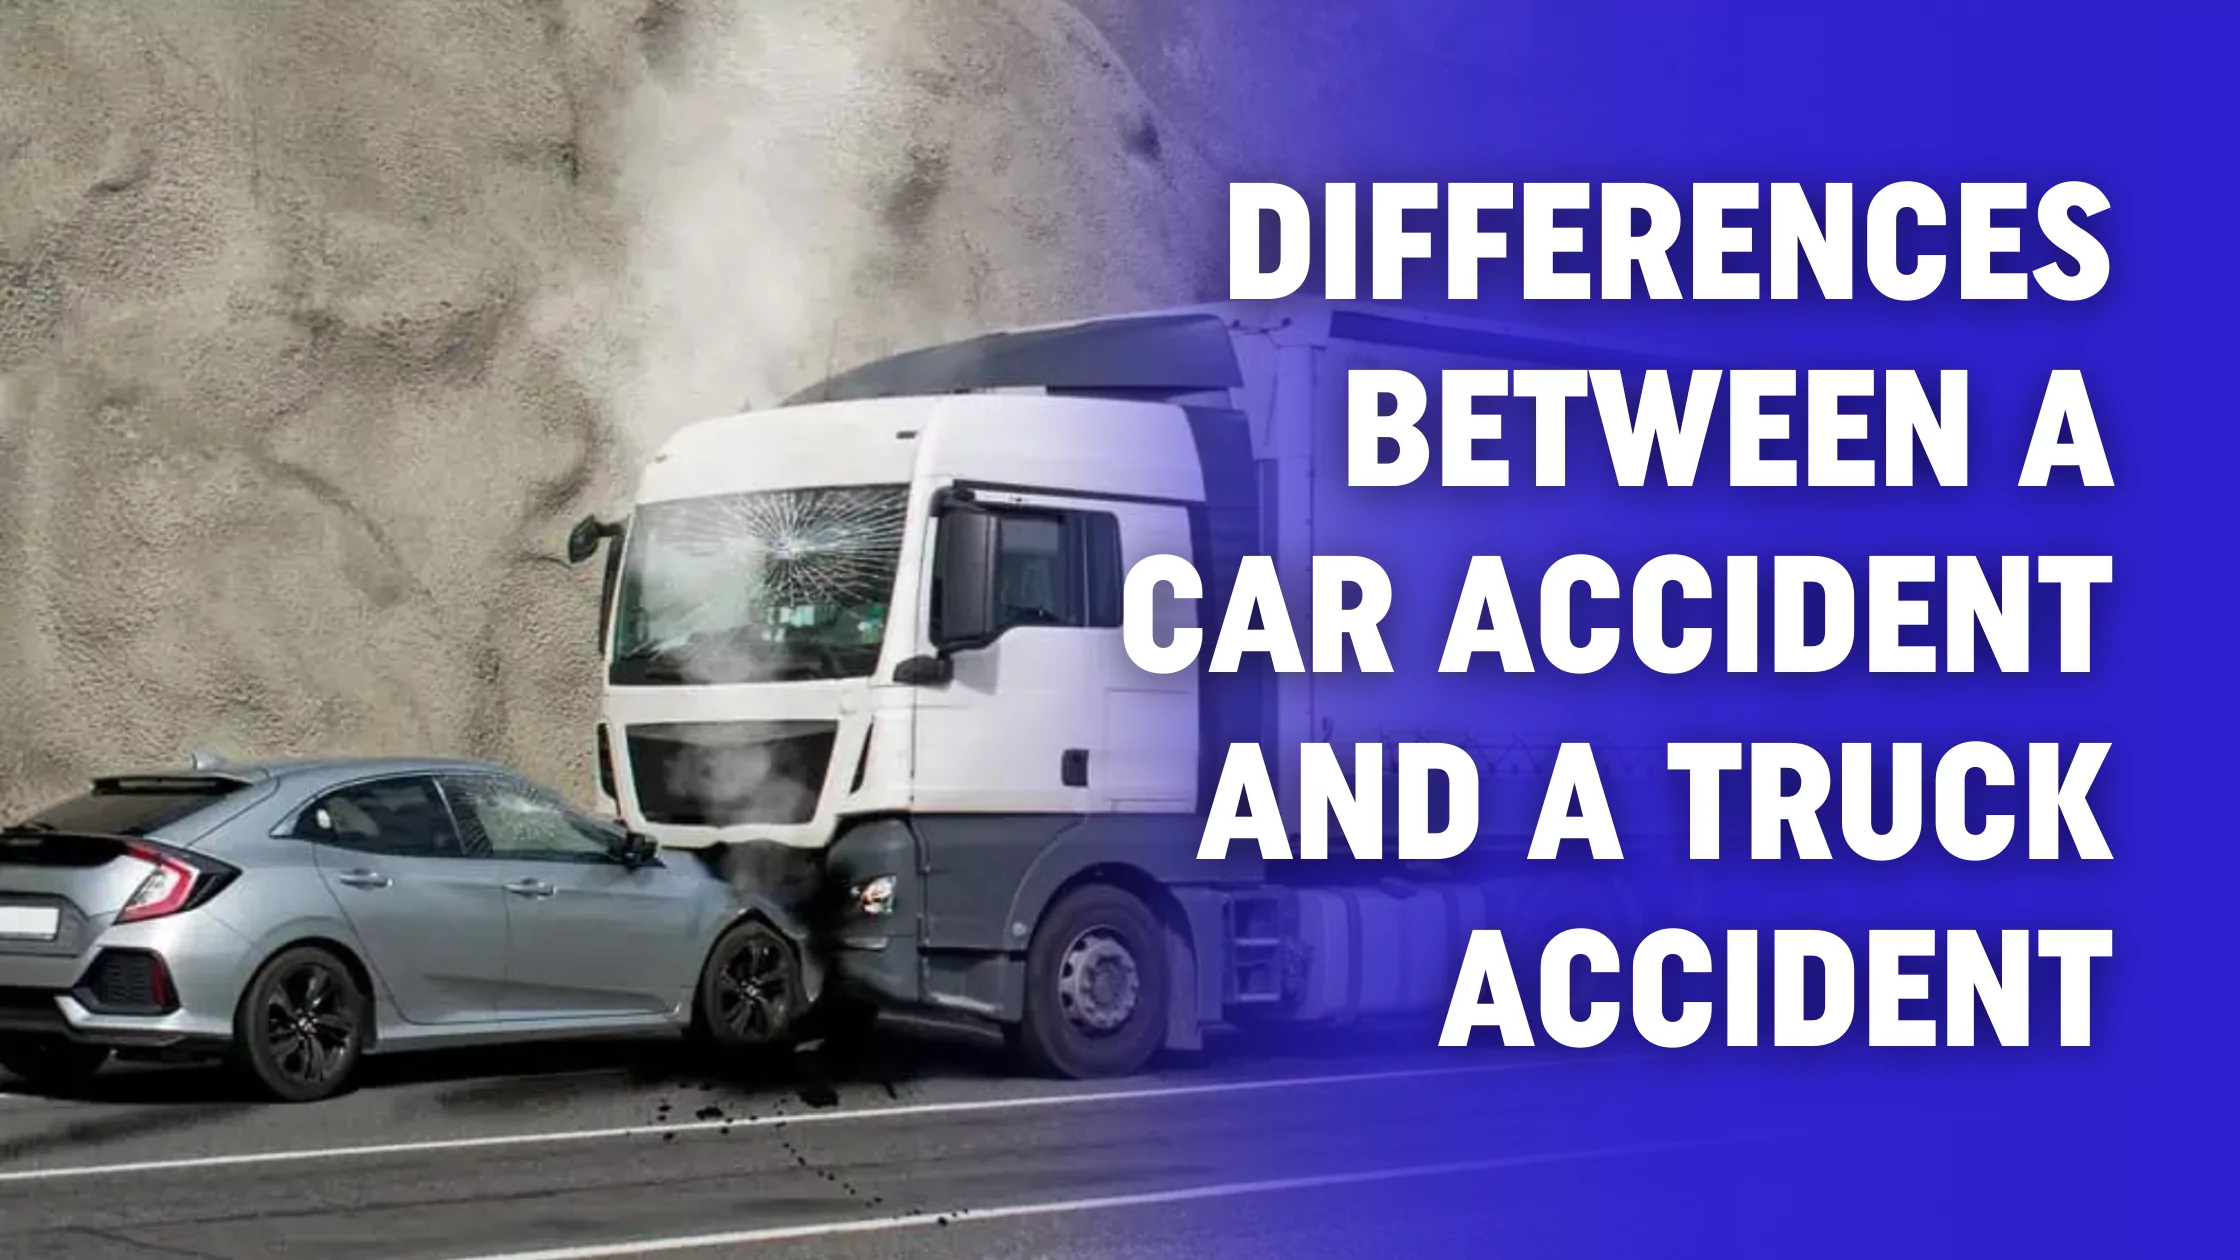 Differences Between A Car Accident and A Truck Accident